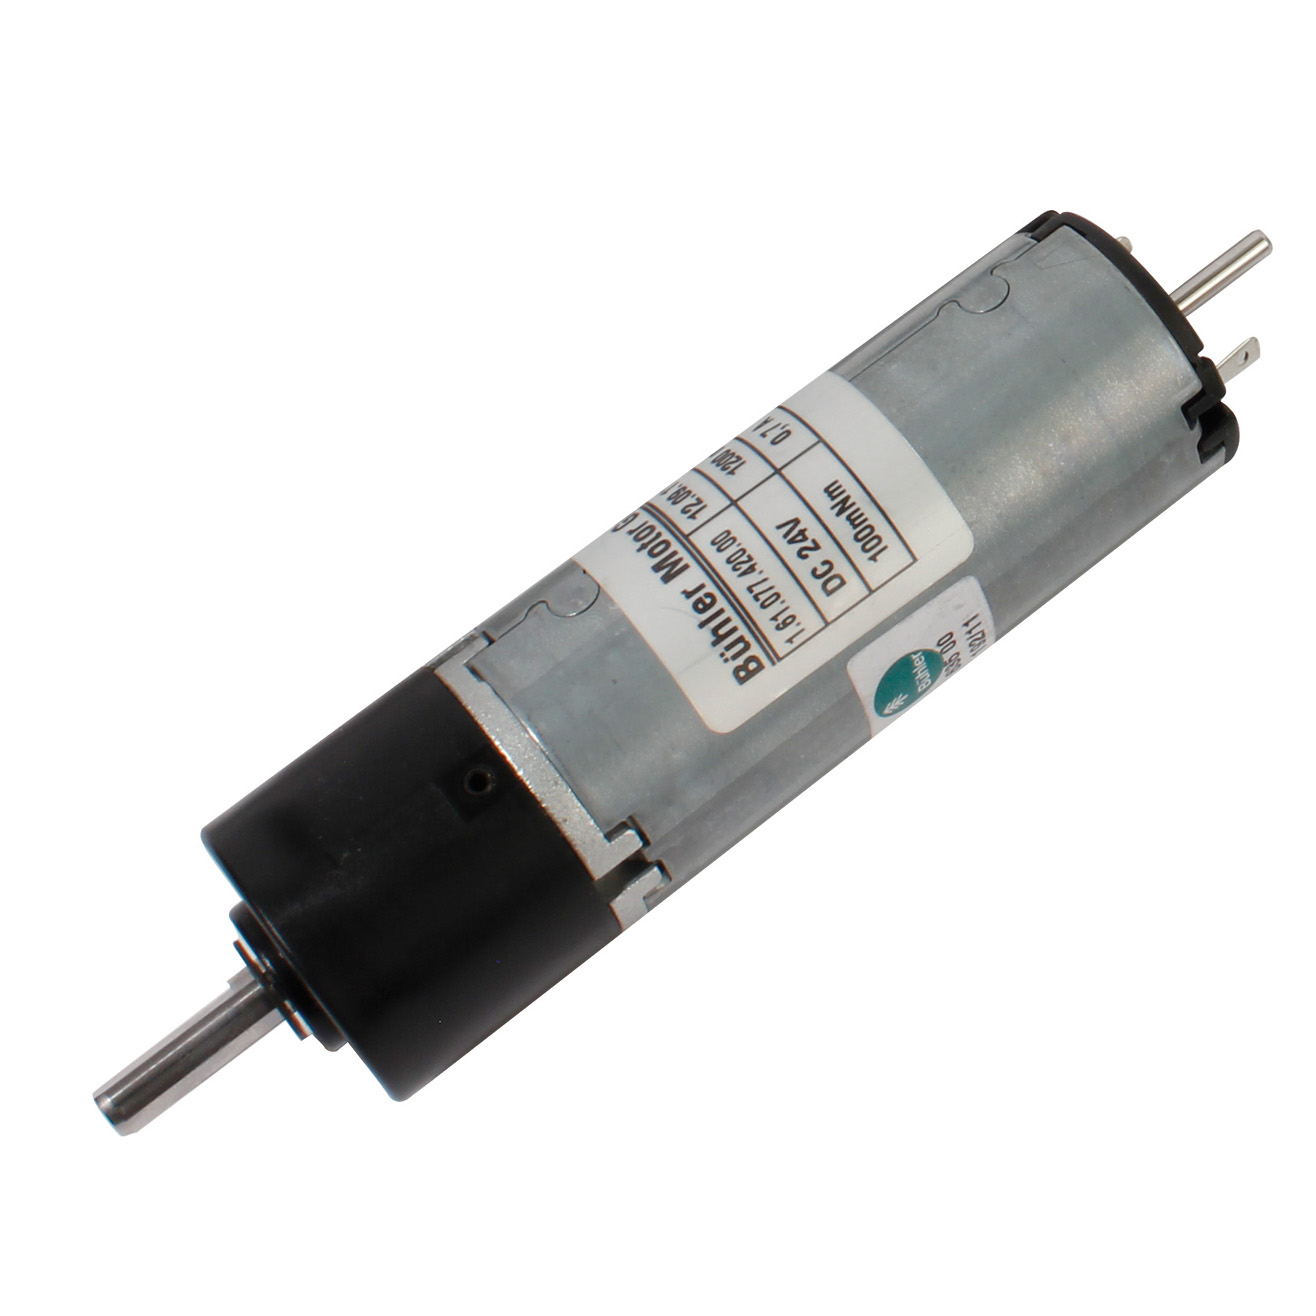 Motor-gearbox 12V and 24V DC - from 0.1 to 2 Nm - 24 V DC - 